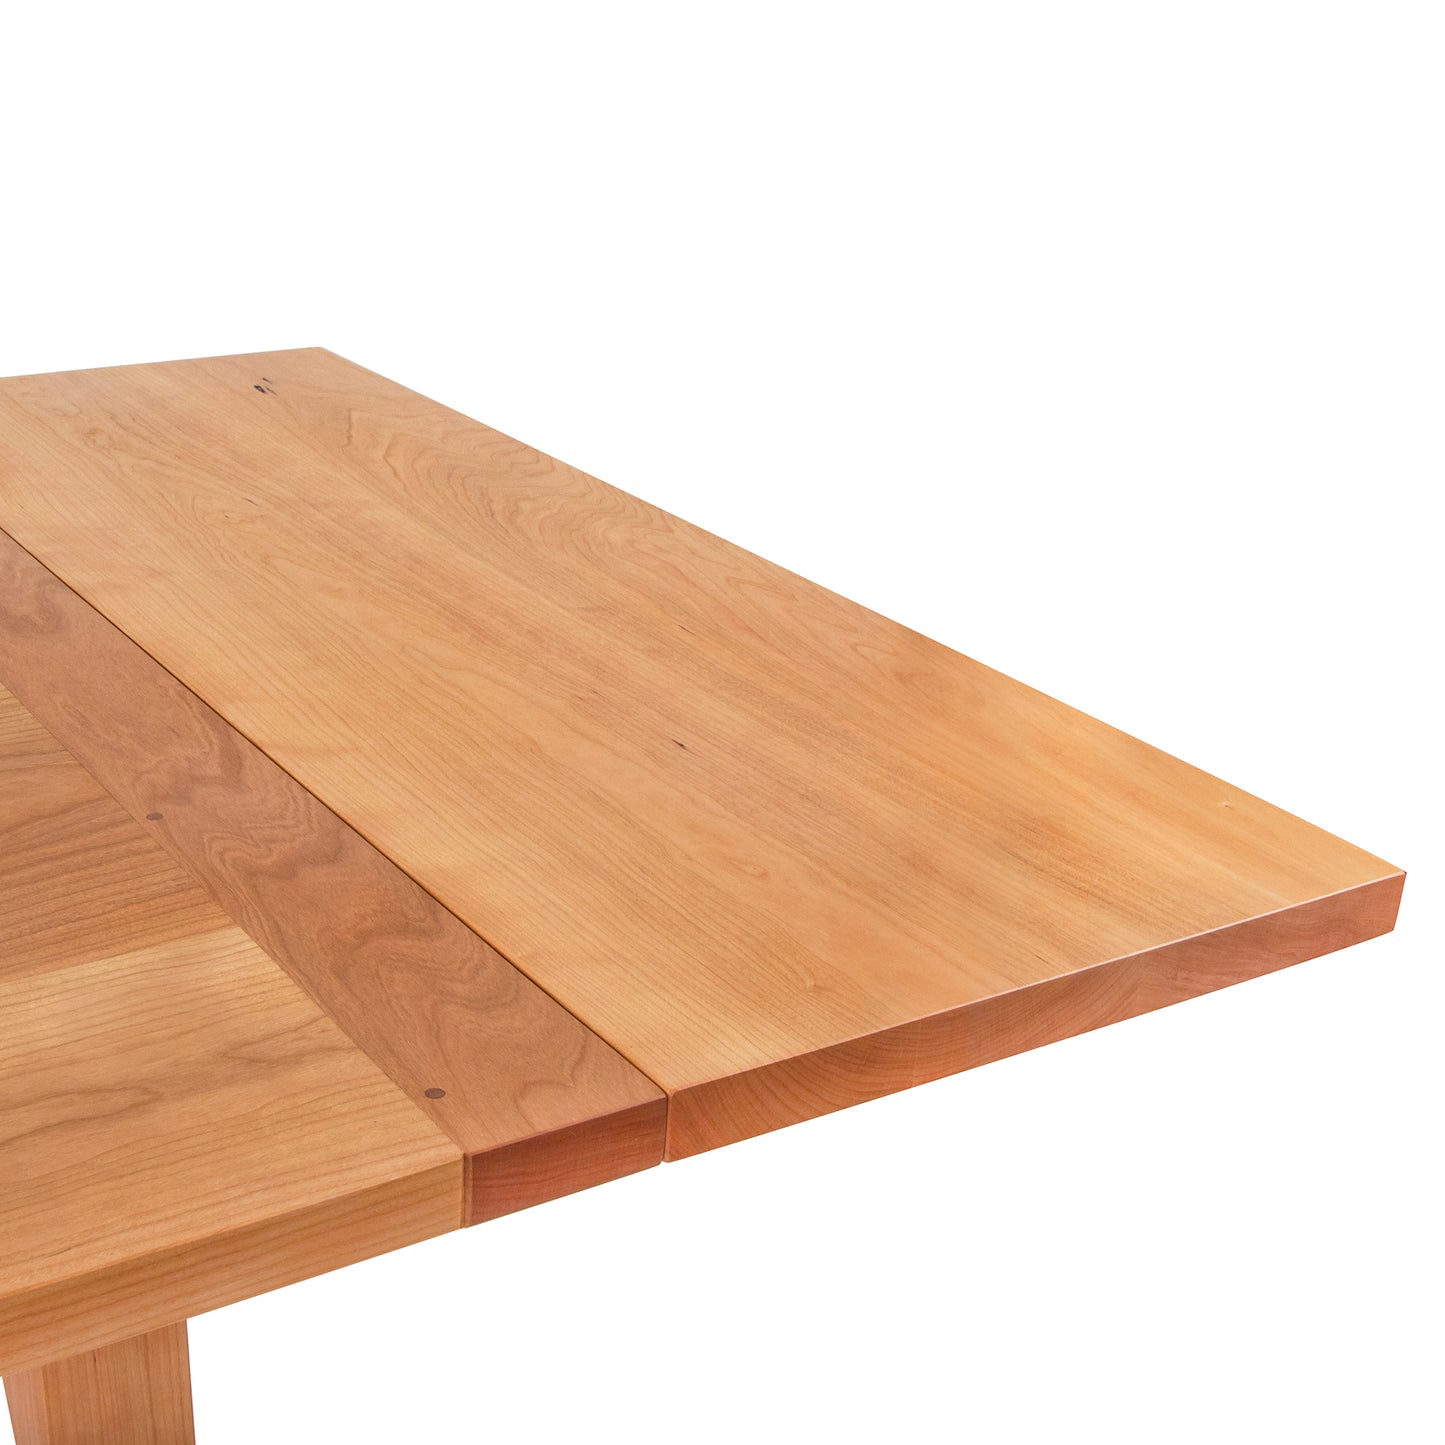 A close-up of a Vermont Shaker Harvest Extension Dining Table corner by Maple Corner Woodworks, highlighting its smooth surface and natural wood grain pattern, set against a white background.